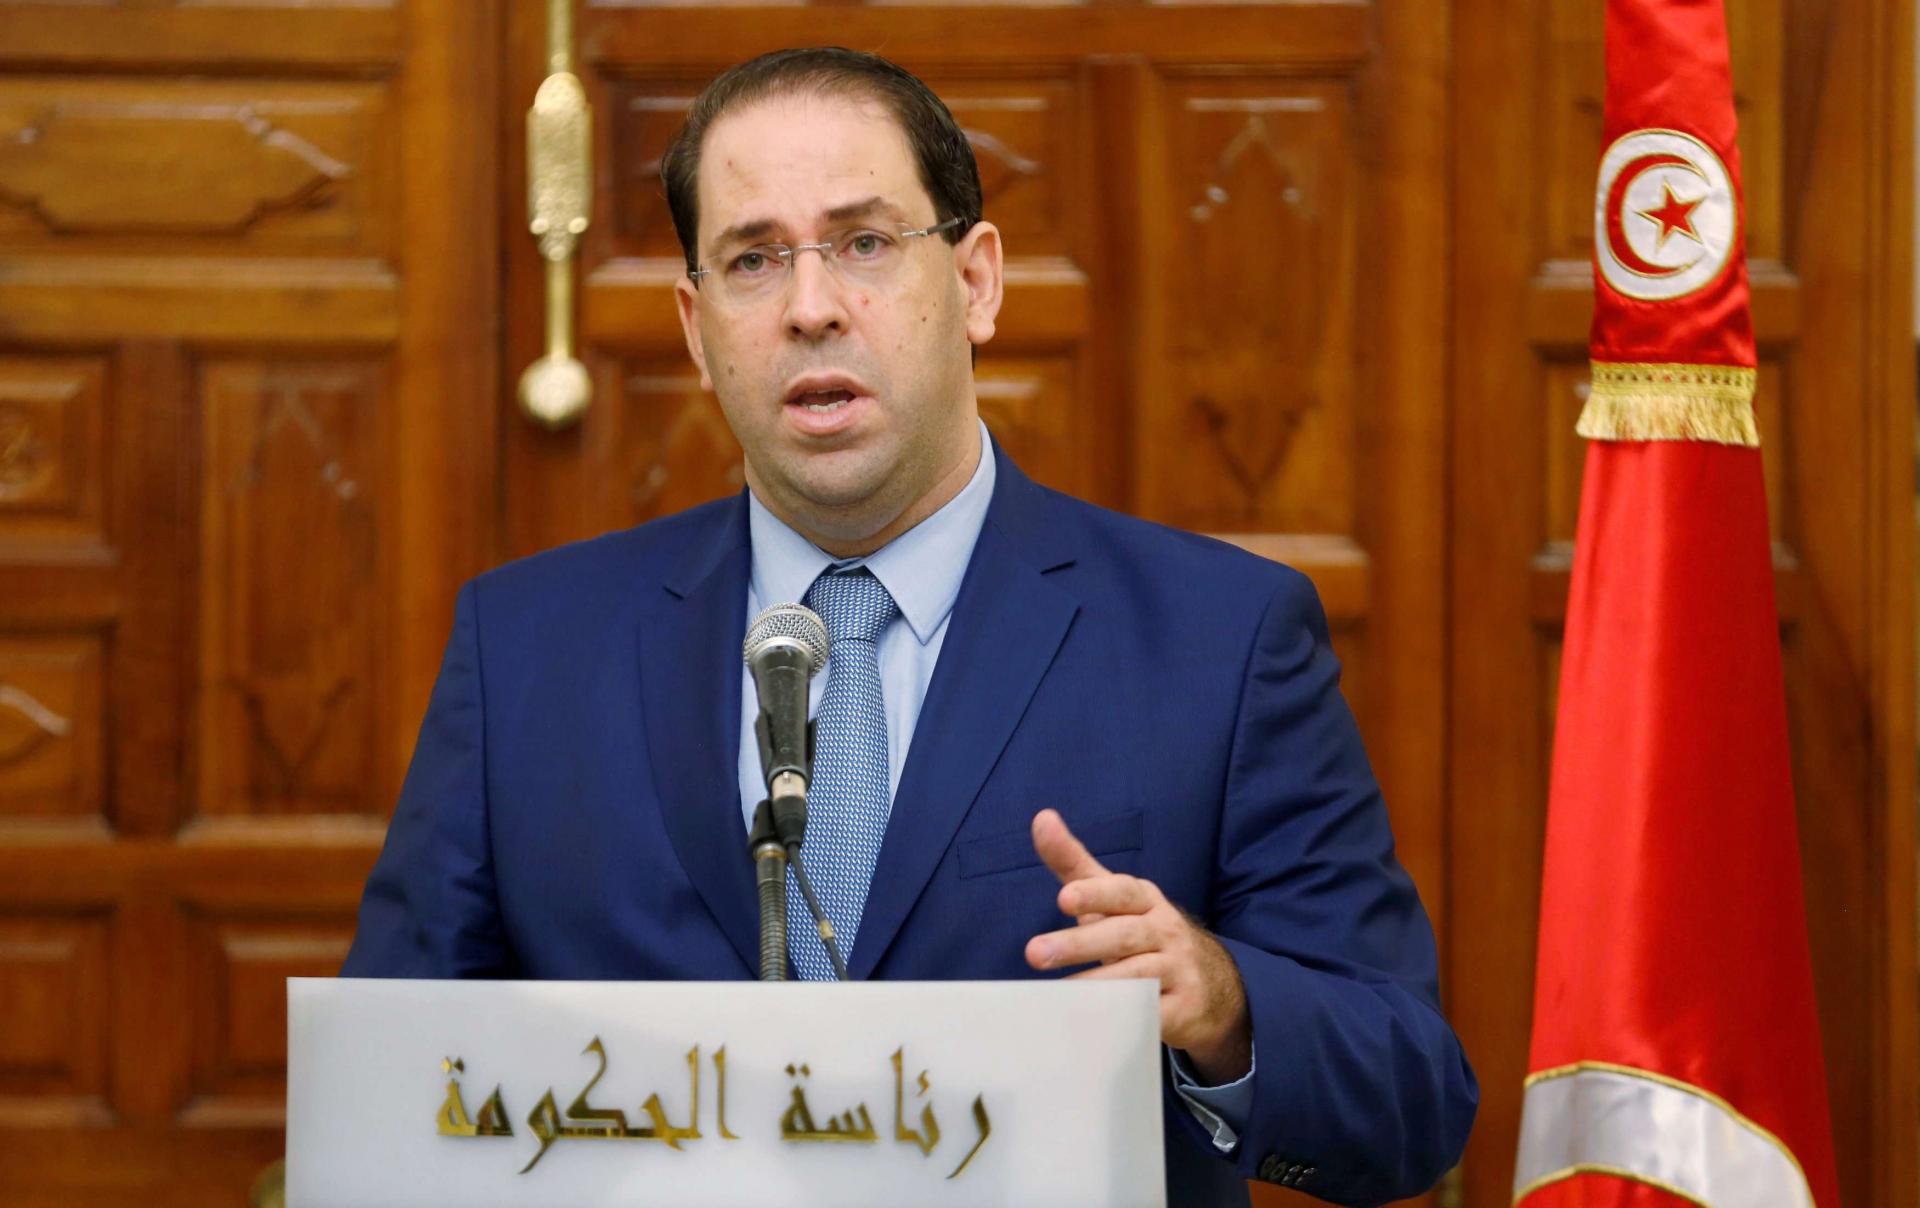 Prime Minister Youssef Chahed conceded that pay was an issue but added that any agreement must take into account the public finances.